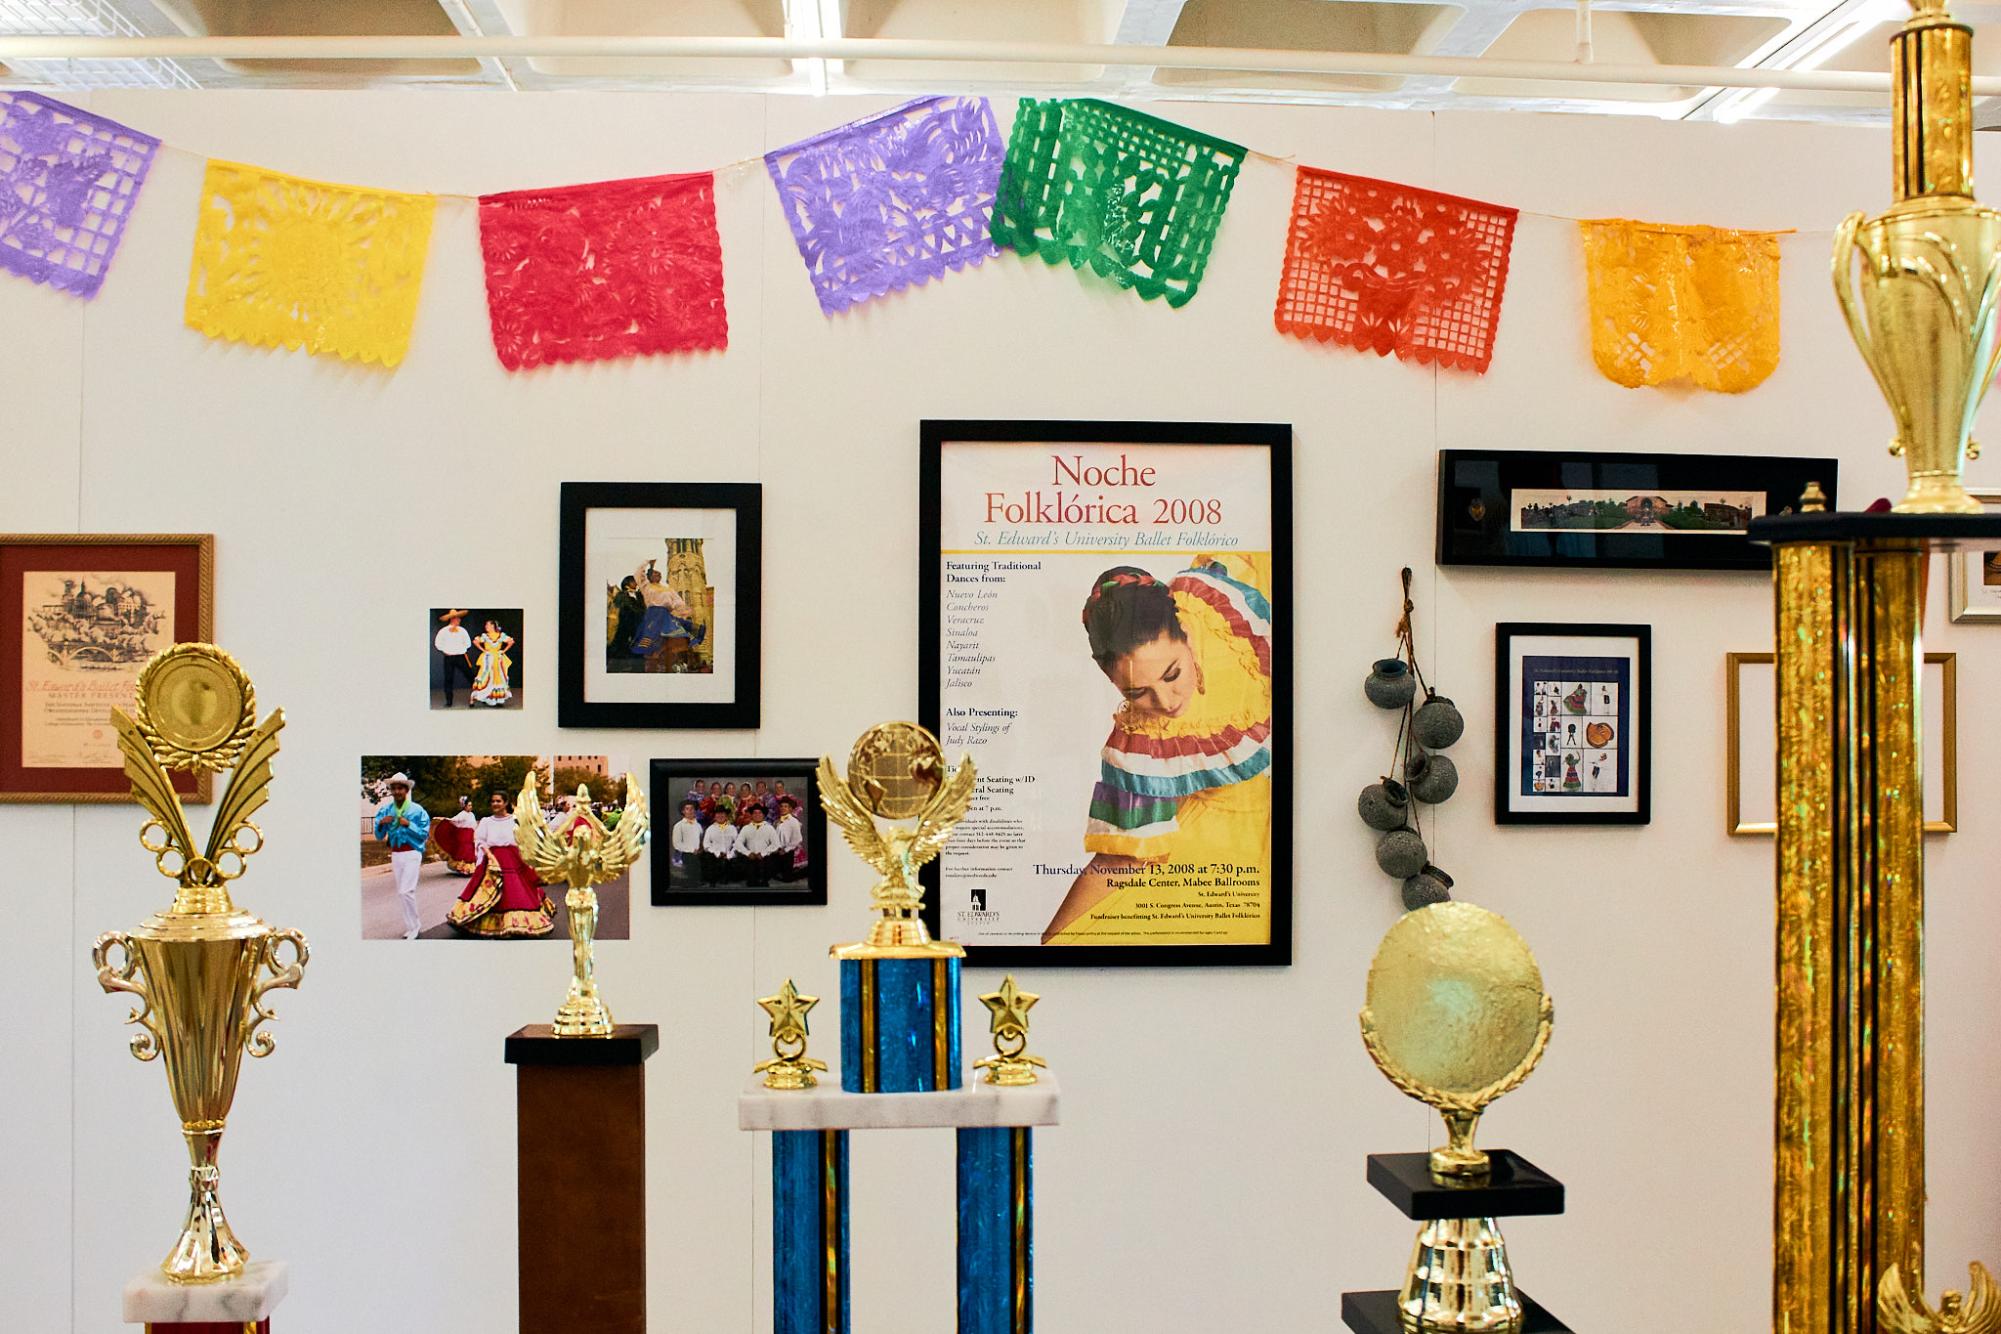 A unique collection of awards, outfits and past images gives visitors the ability to walk through St. Edwards Ballet Folkloricos history. The exhibit is currently on display in Munday Library on the second floor.